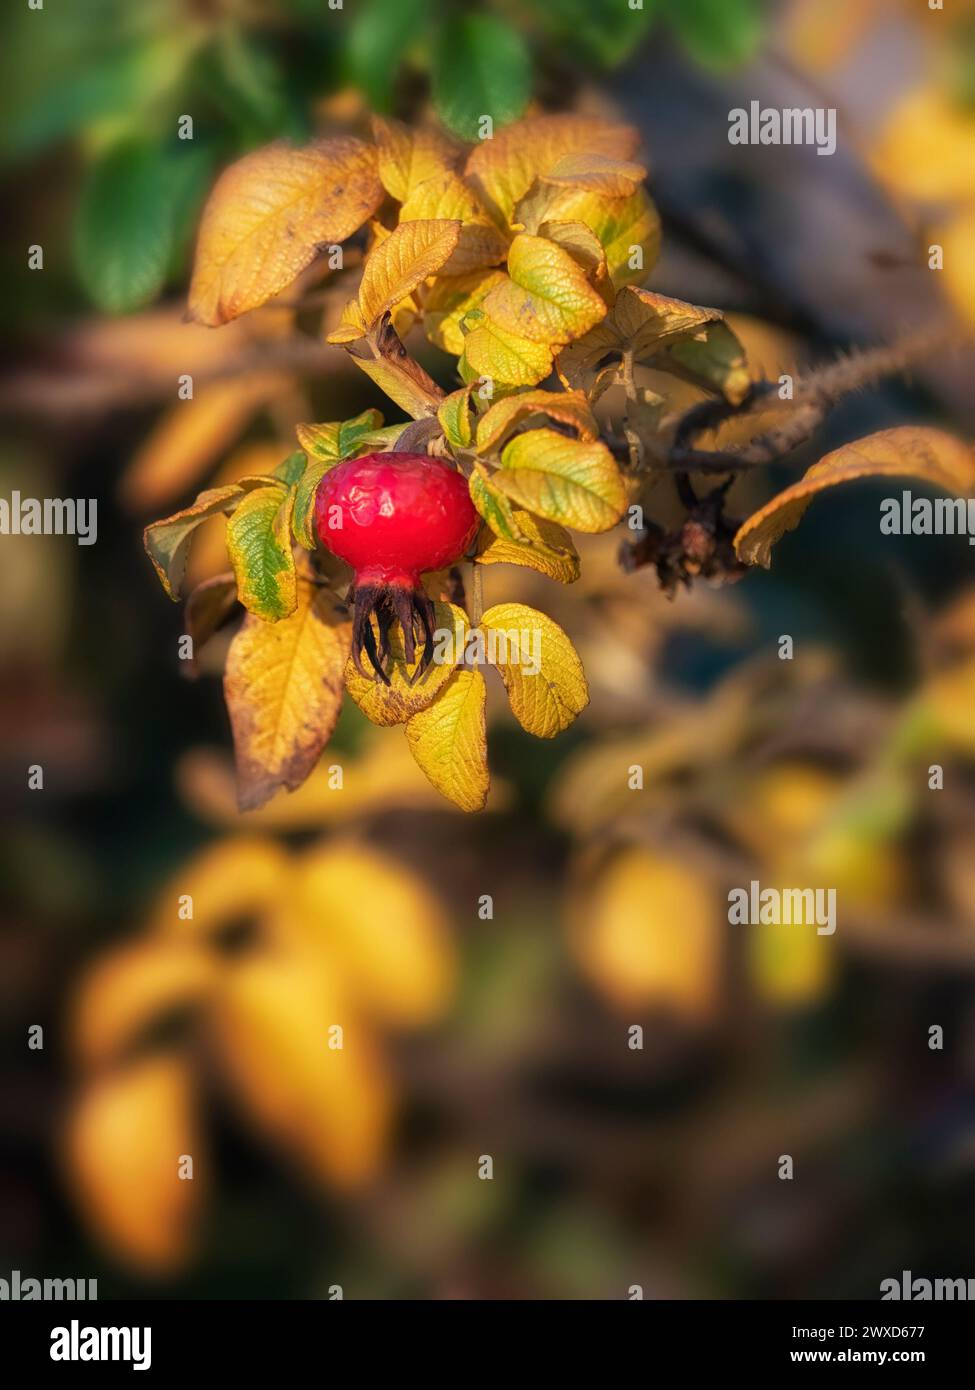 Closeup of yellow flowers and withered red rose hip fruits of Rosa rugosa 'Rubra' in Autumn Stock Photo